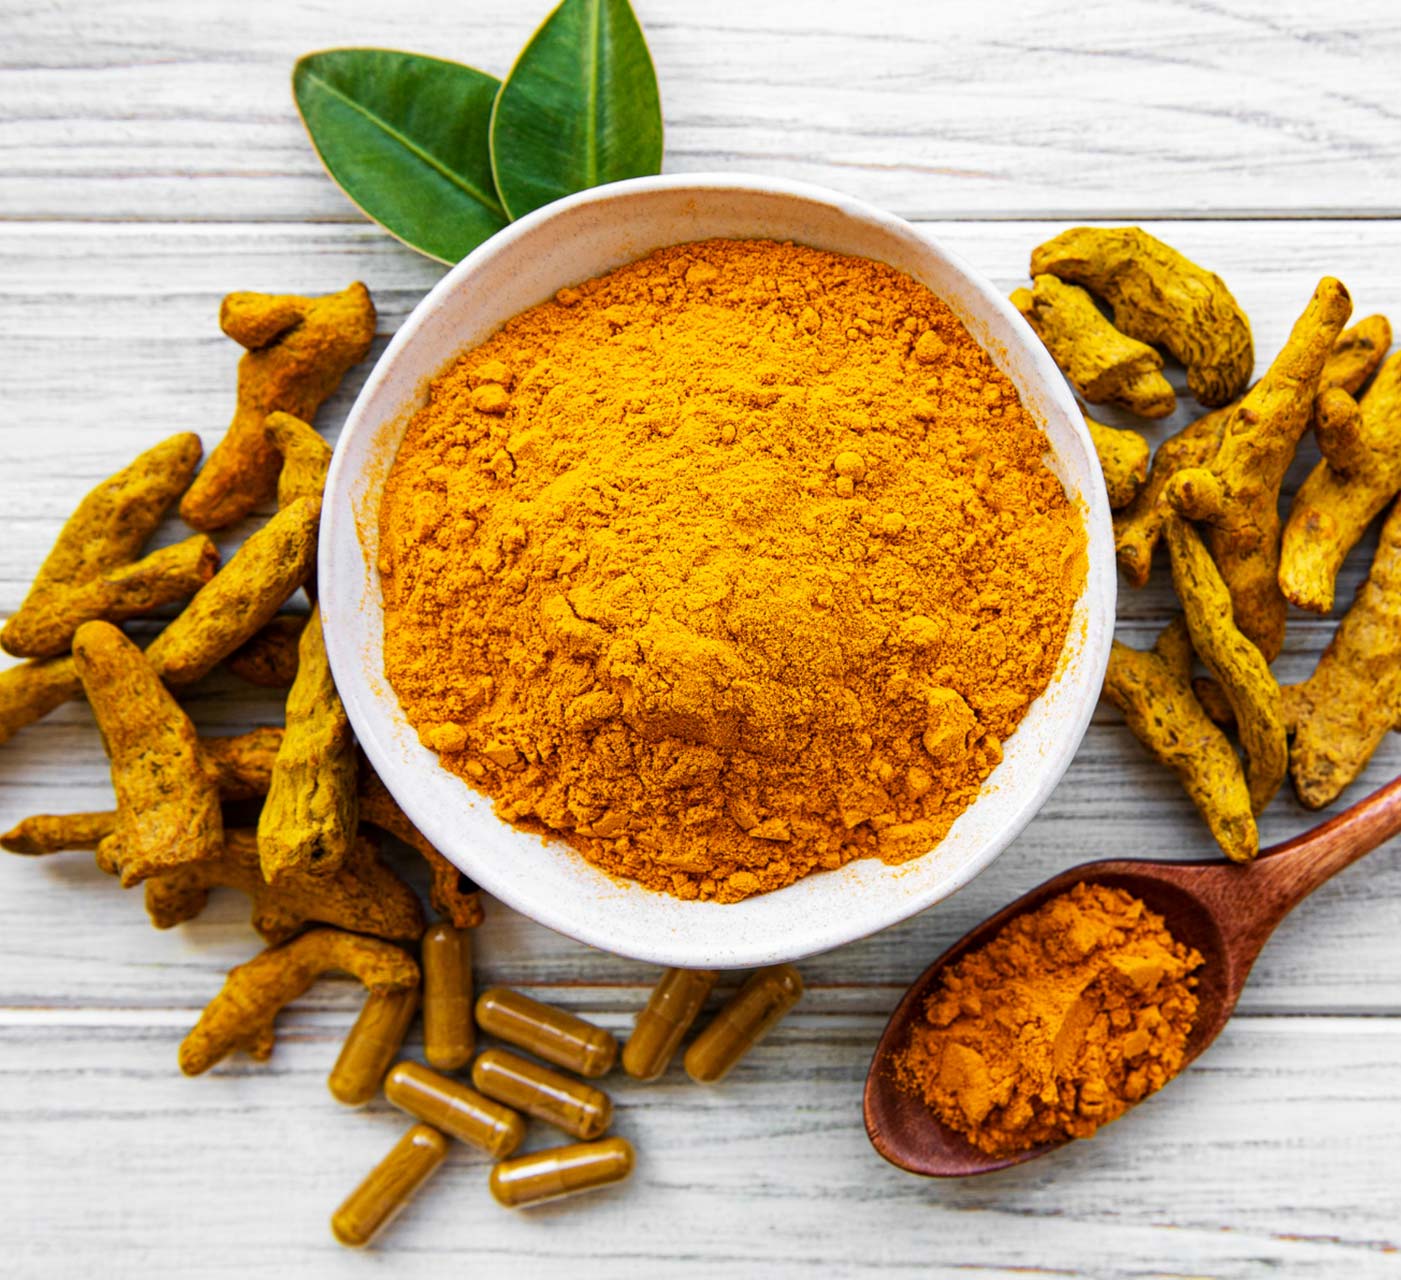 Turmeric - Wonder Remedy For Acne Breakouts And Scars